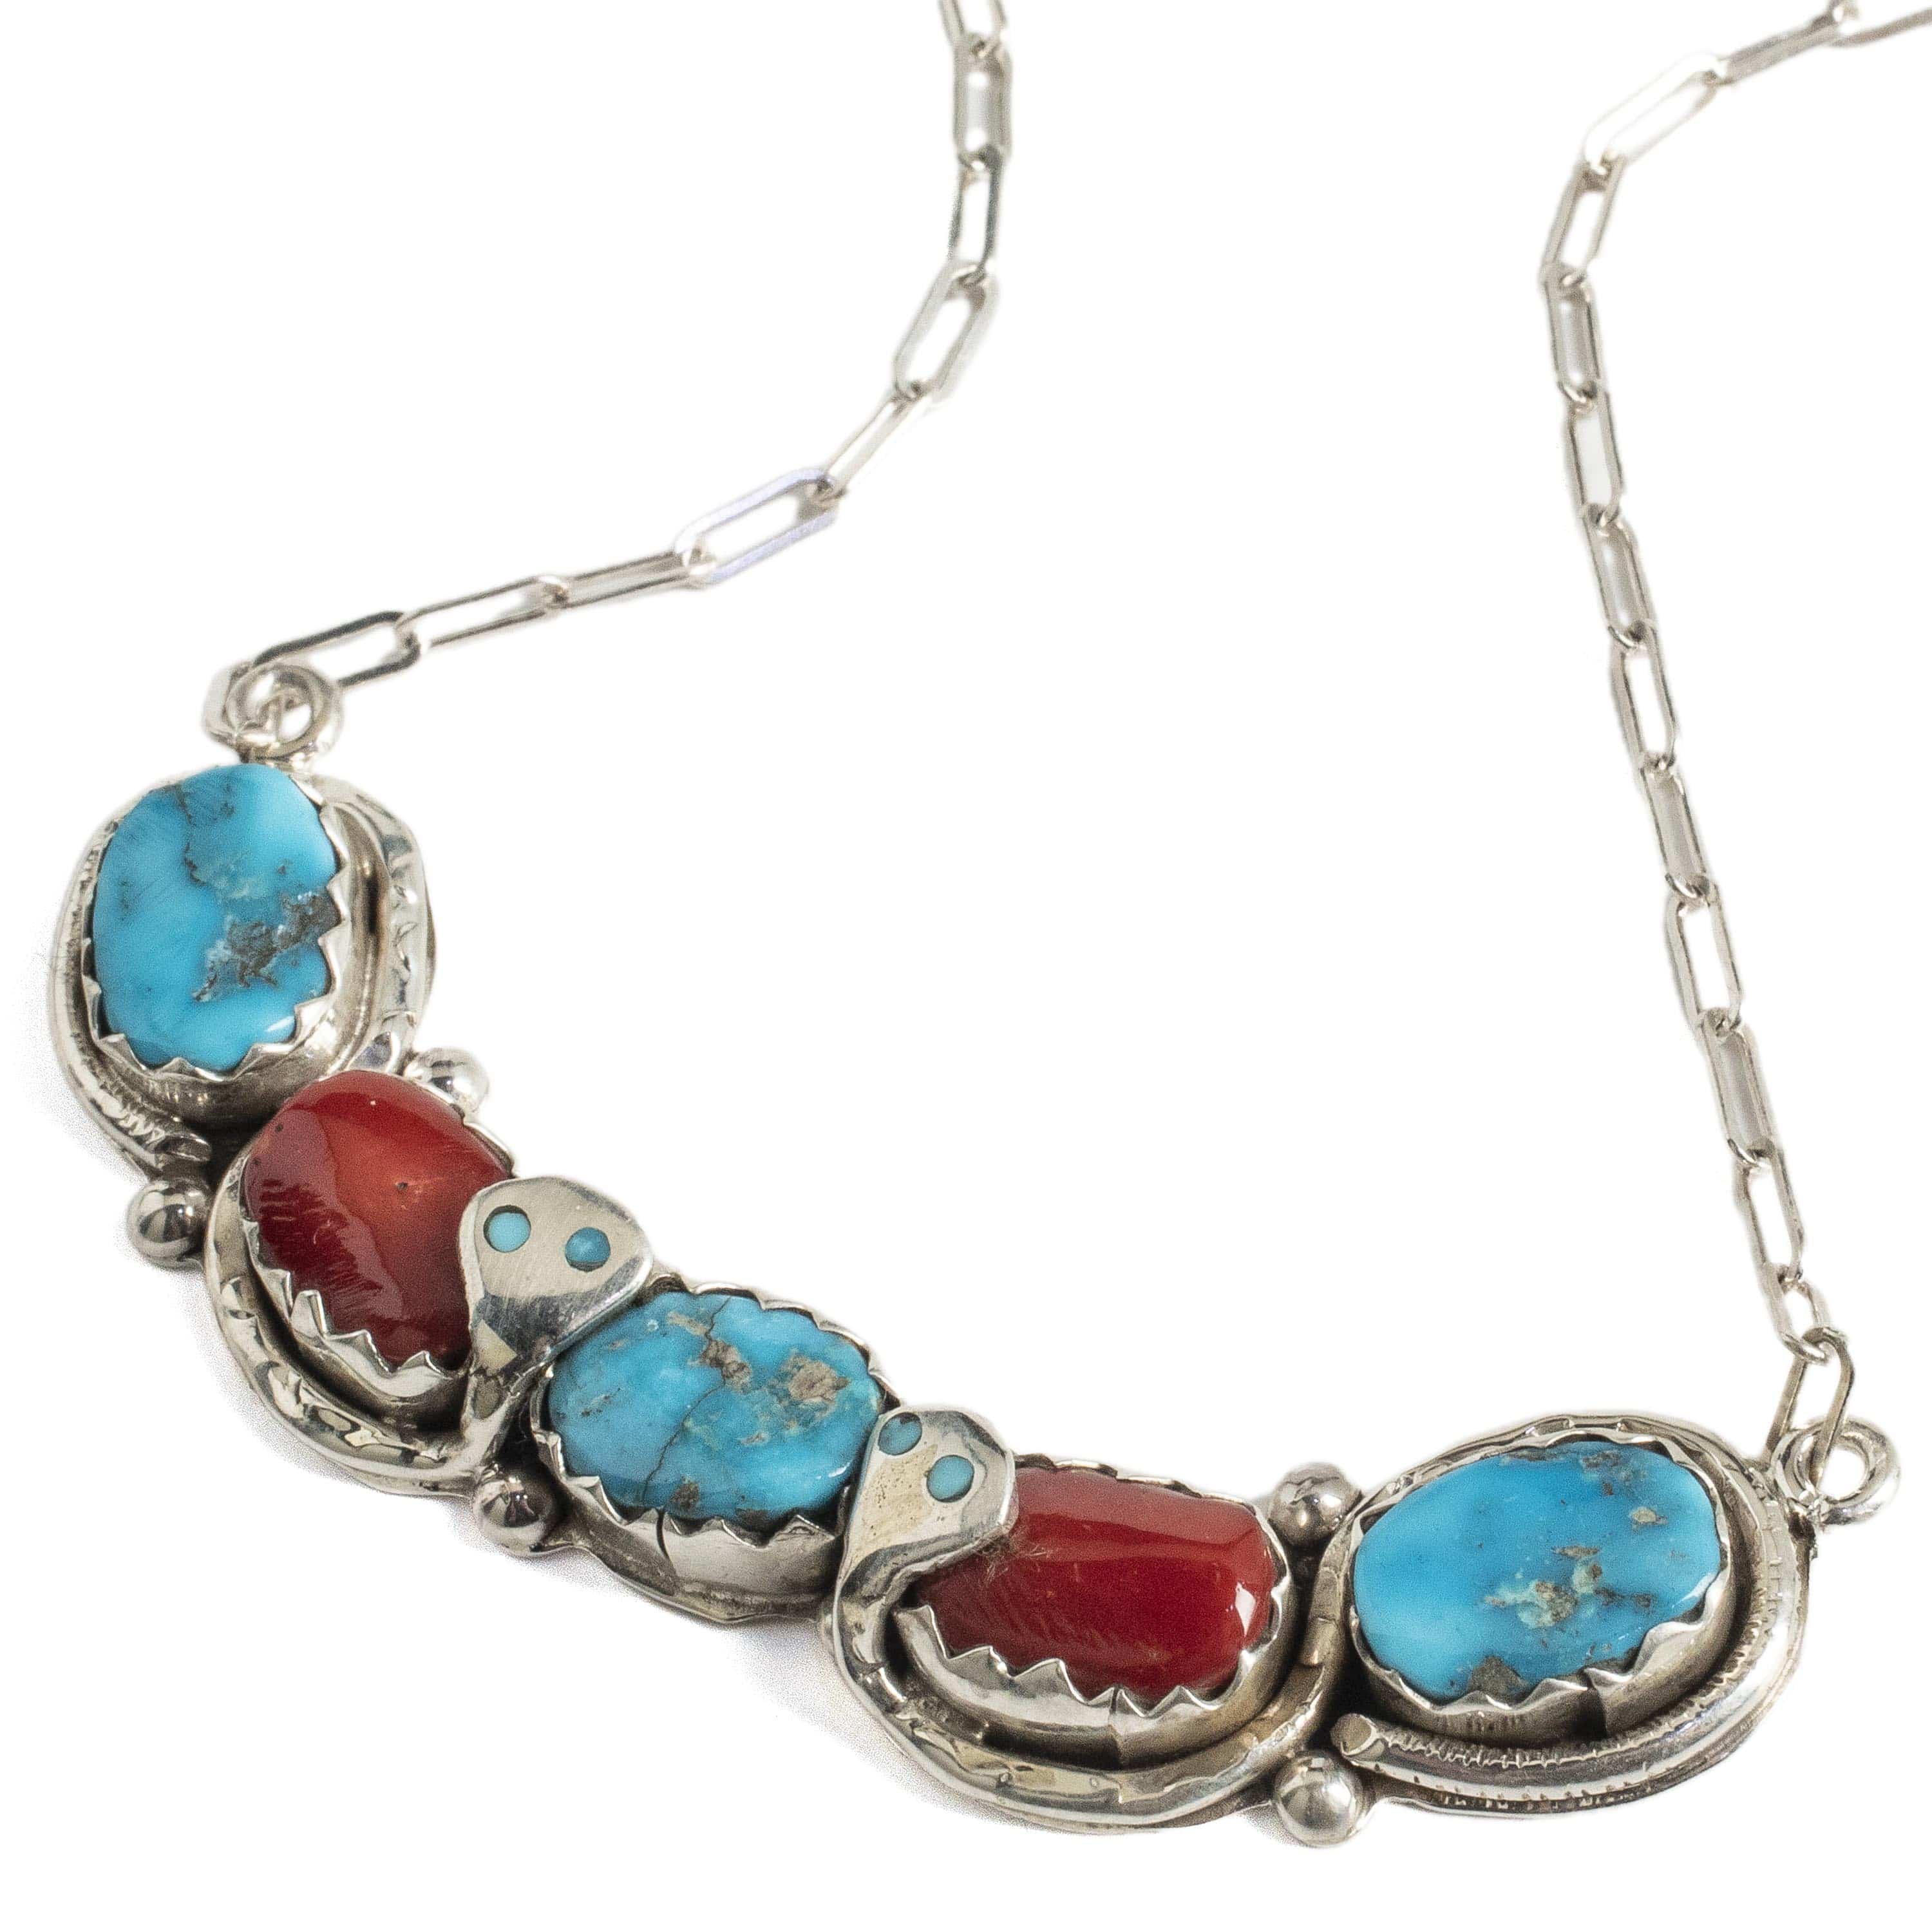 Kalifano Native American Jewelry Gloria G. Kingman Turquoise and Coral Serpentine Zuni USA Native American Made 925 Sterling Silver Necklace NAN1600.002